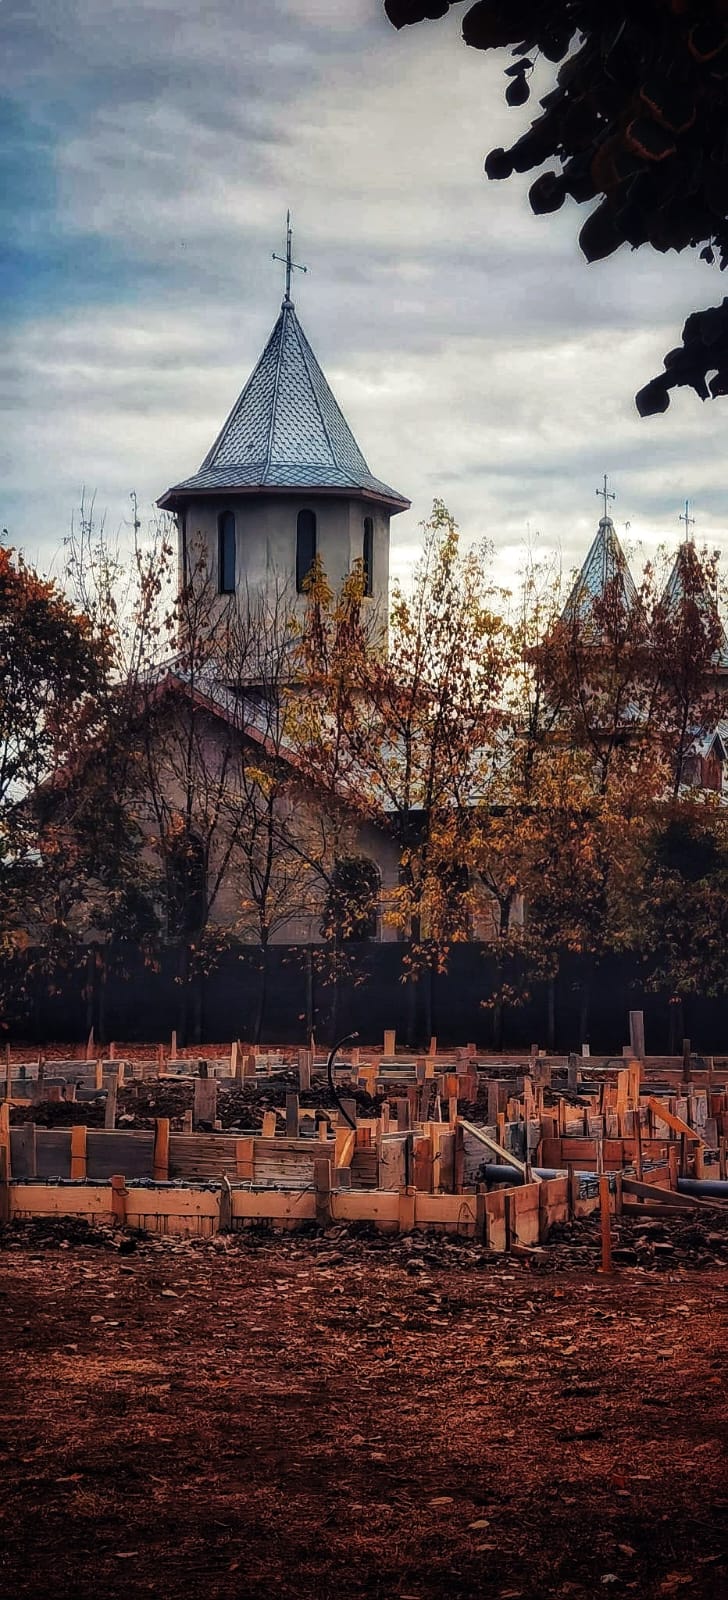 Church behind trees with new building construction in front during Autumn